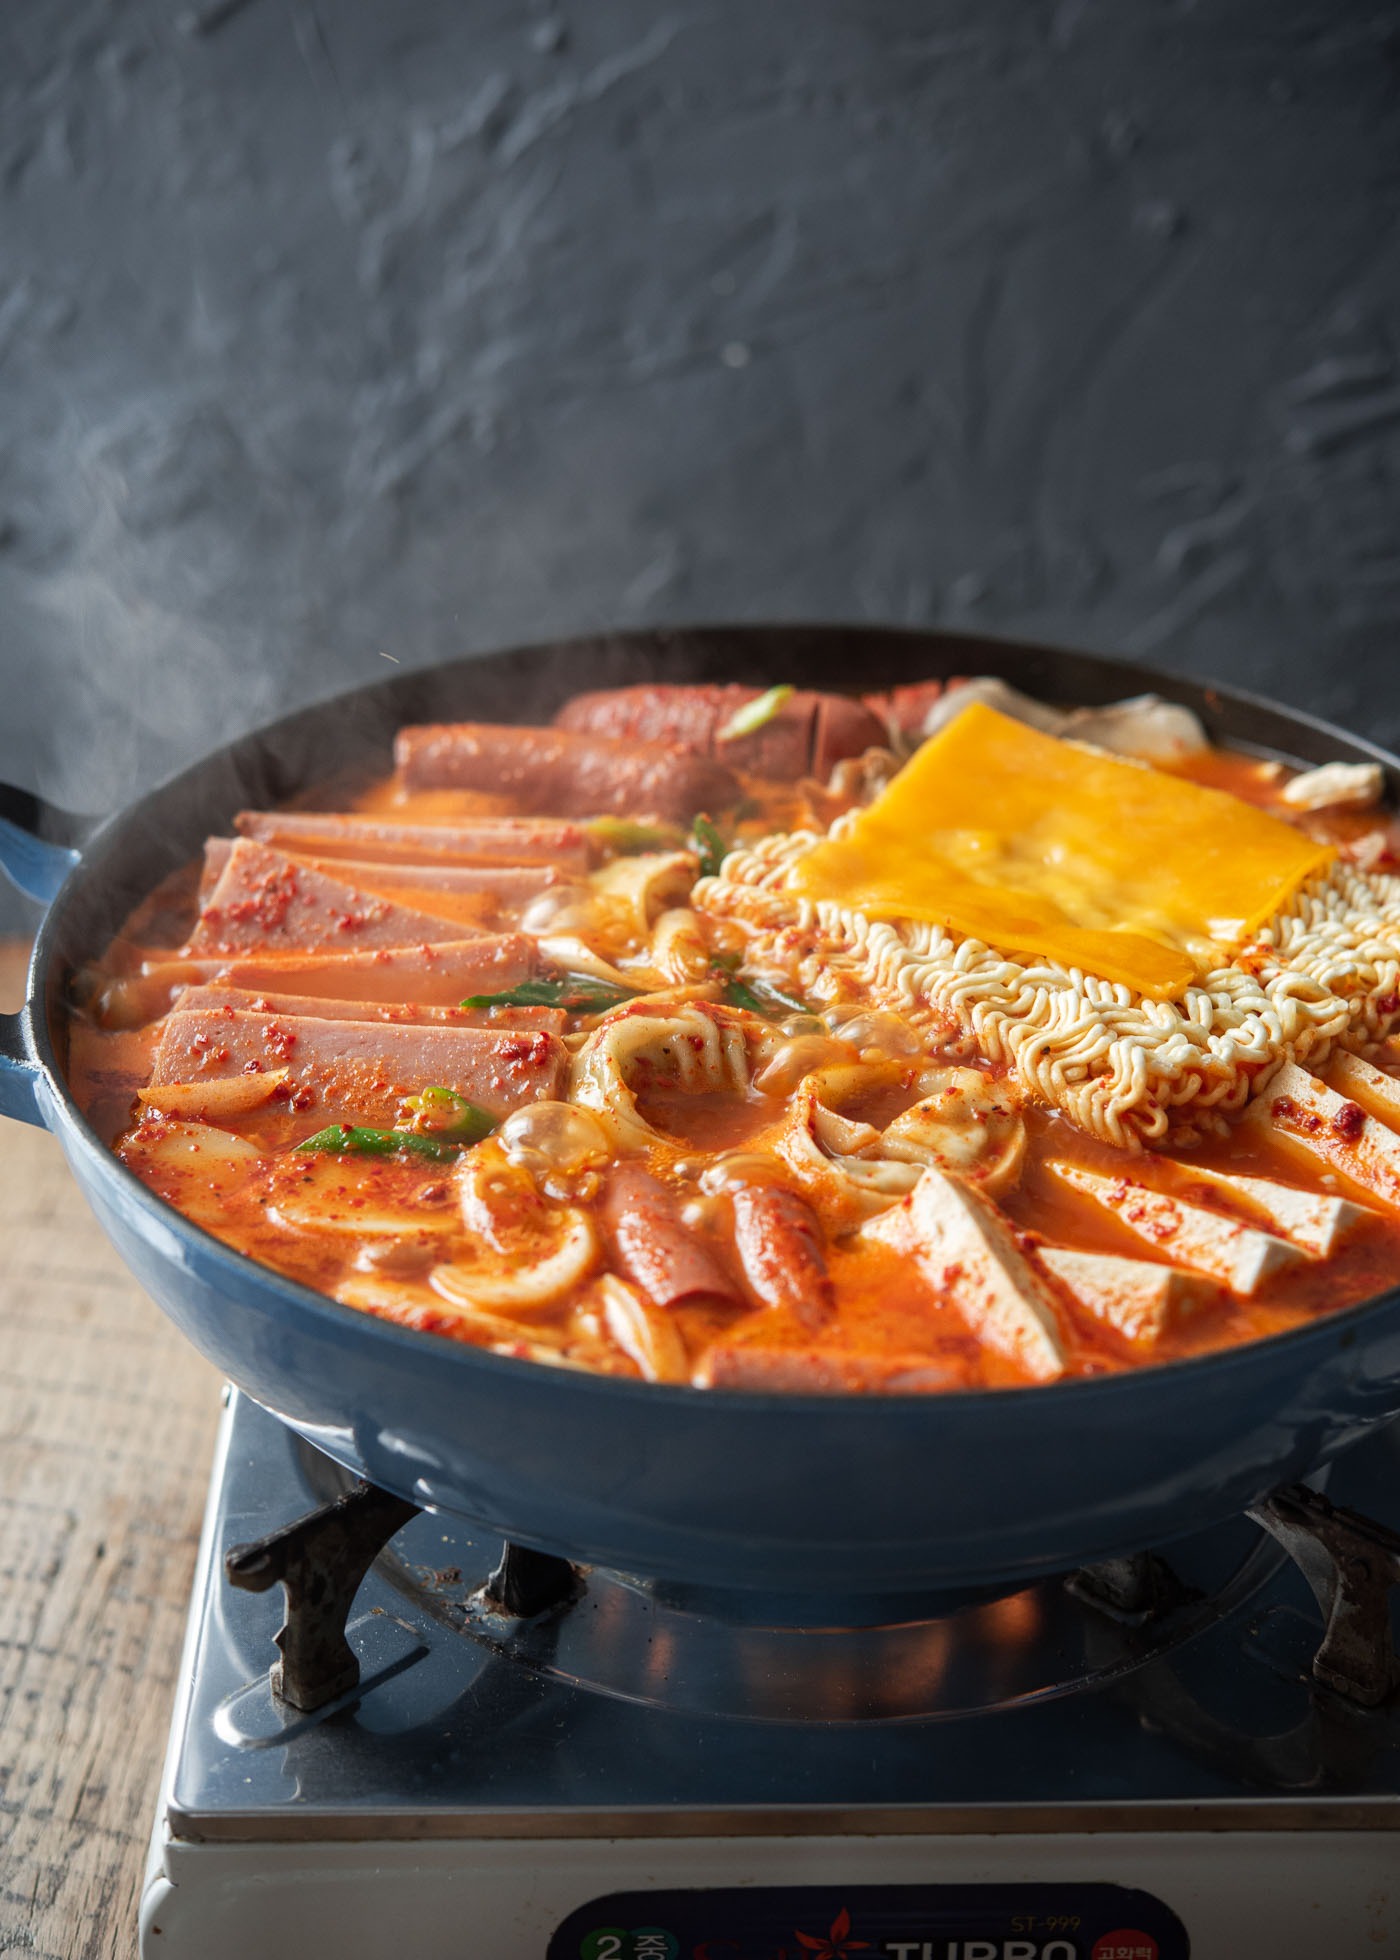 Budae jjigae, Korean army stew, with all the ingredients simmering over a portable burner.